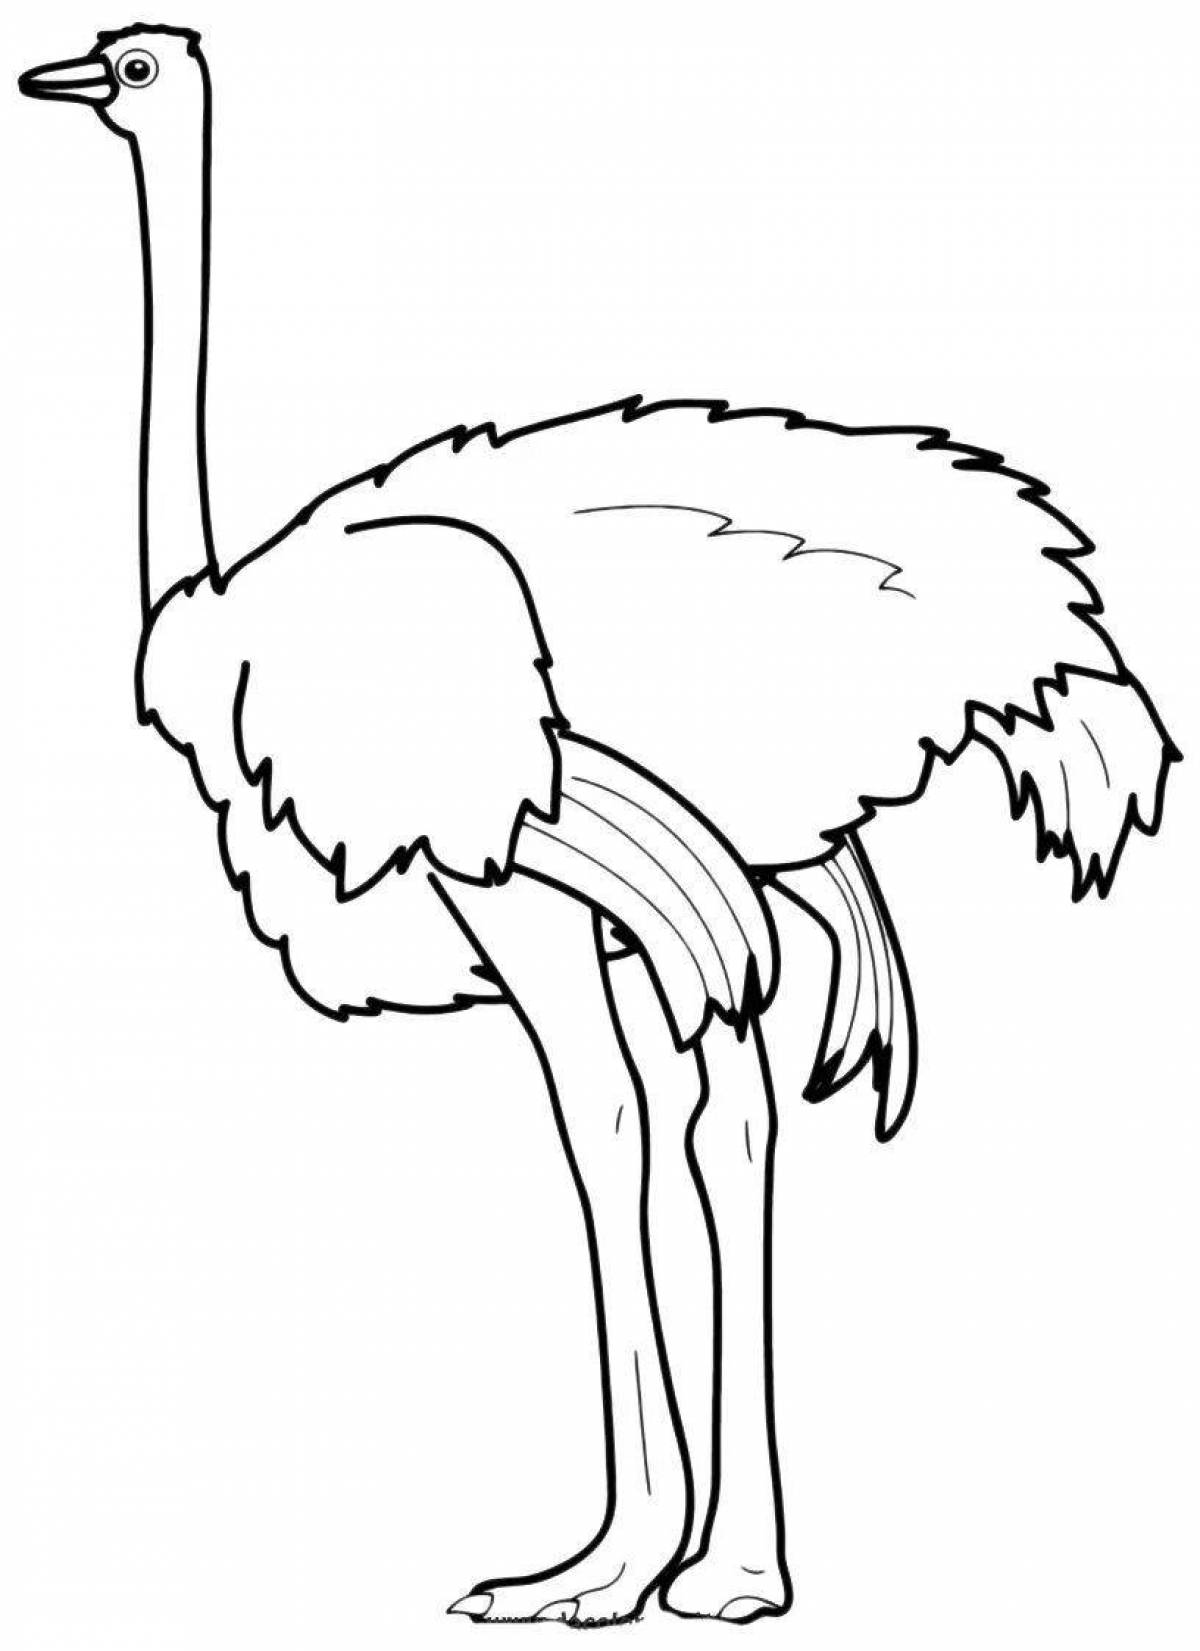 Creative ostrich coloring for kids